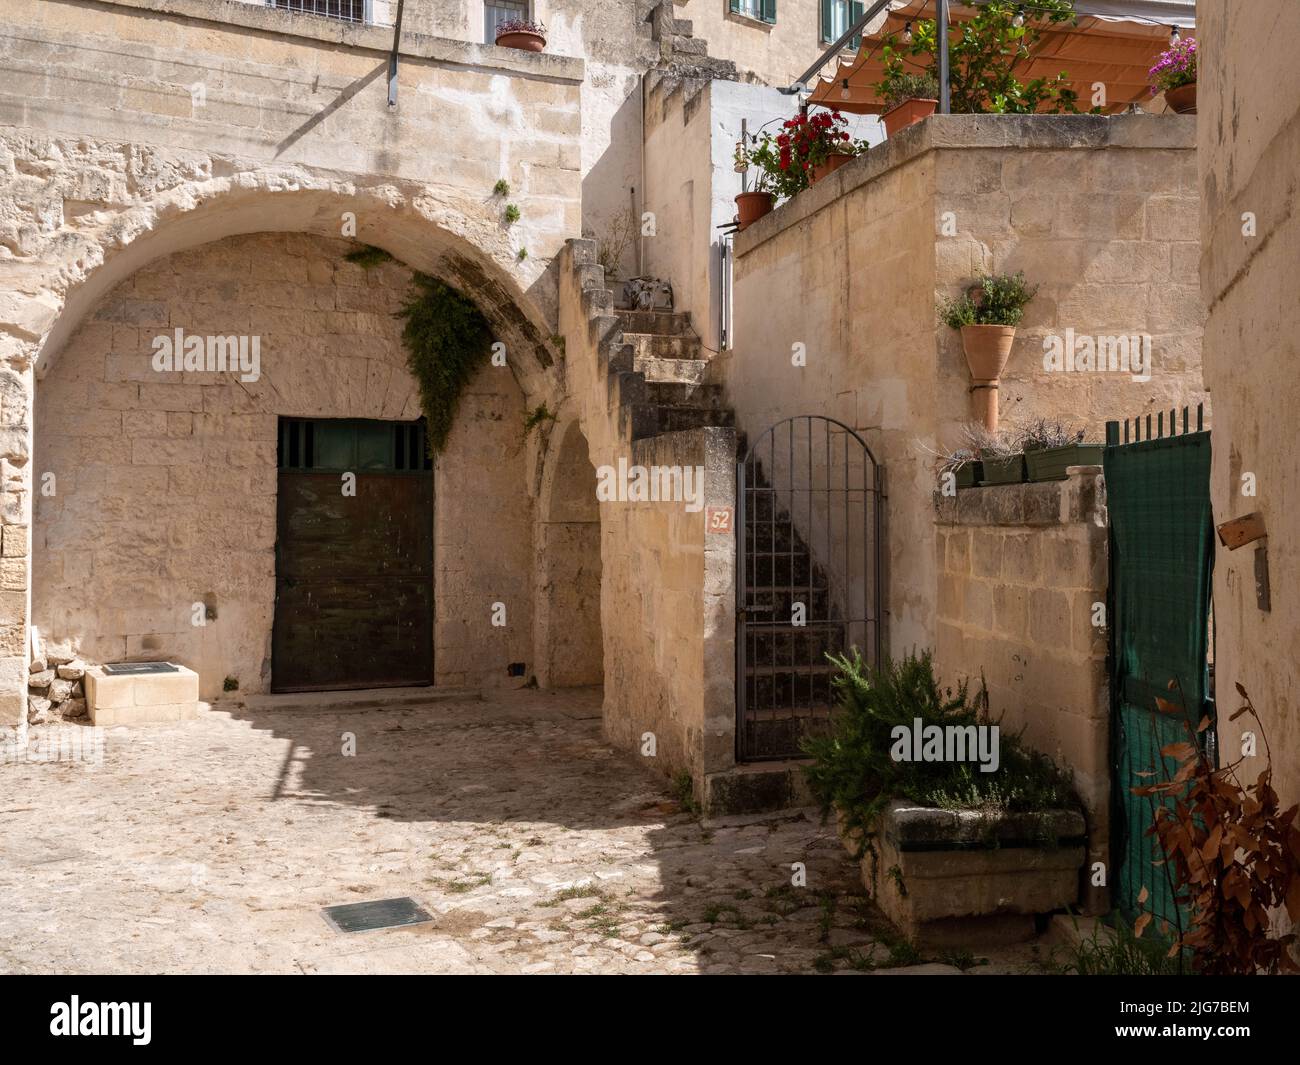 Street scene in the Sassi neighborhood of Matera, Italy with limestone houses and cave-like dwellings throughout & dating from Paleolithic times Stock Photo